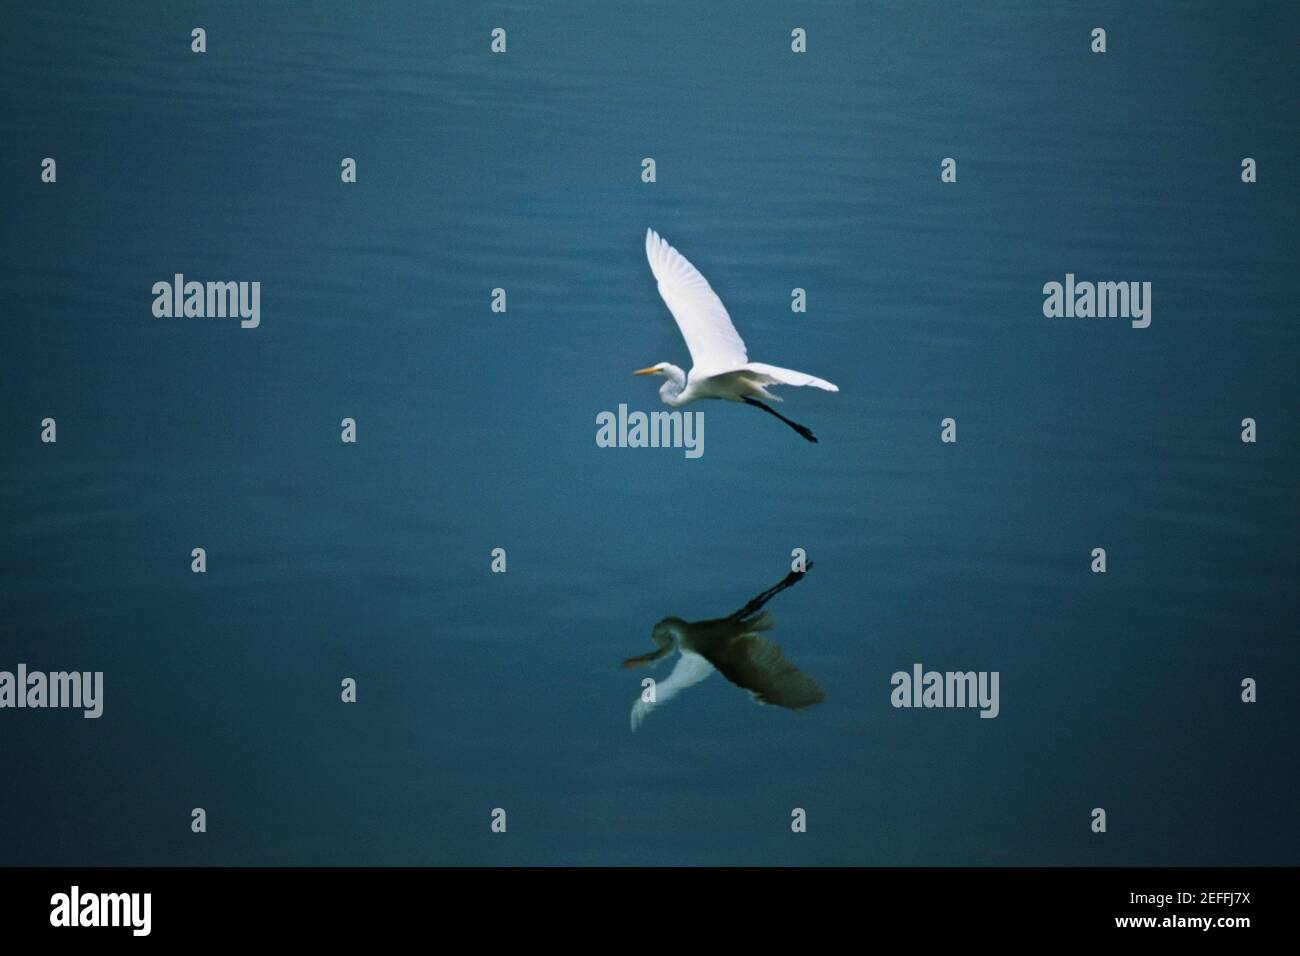 A white egret is seen flying over the island of Jamaica Stock Photo